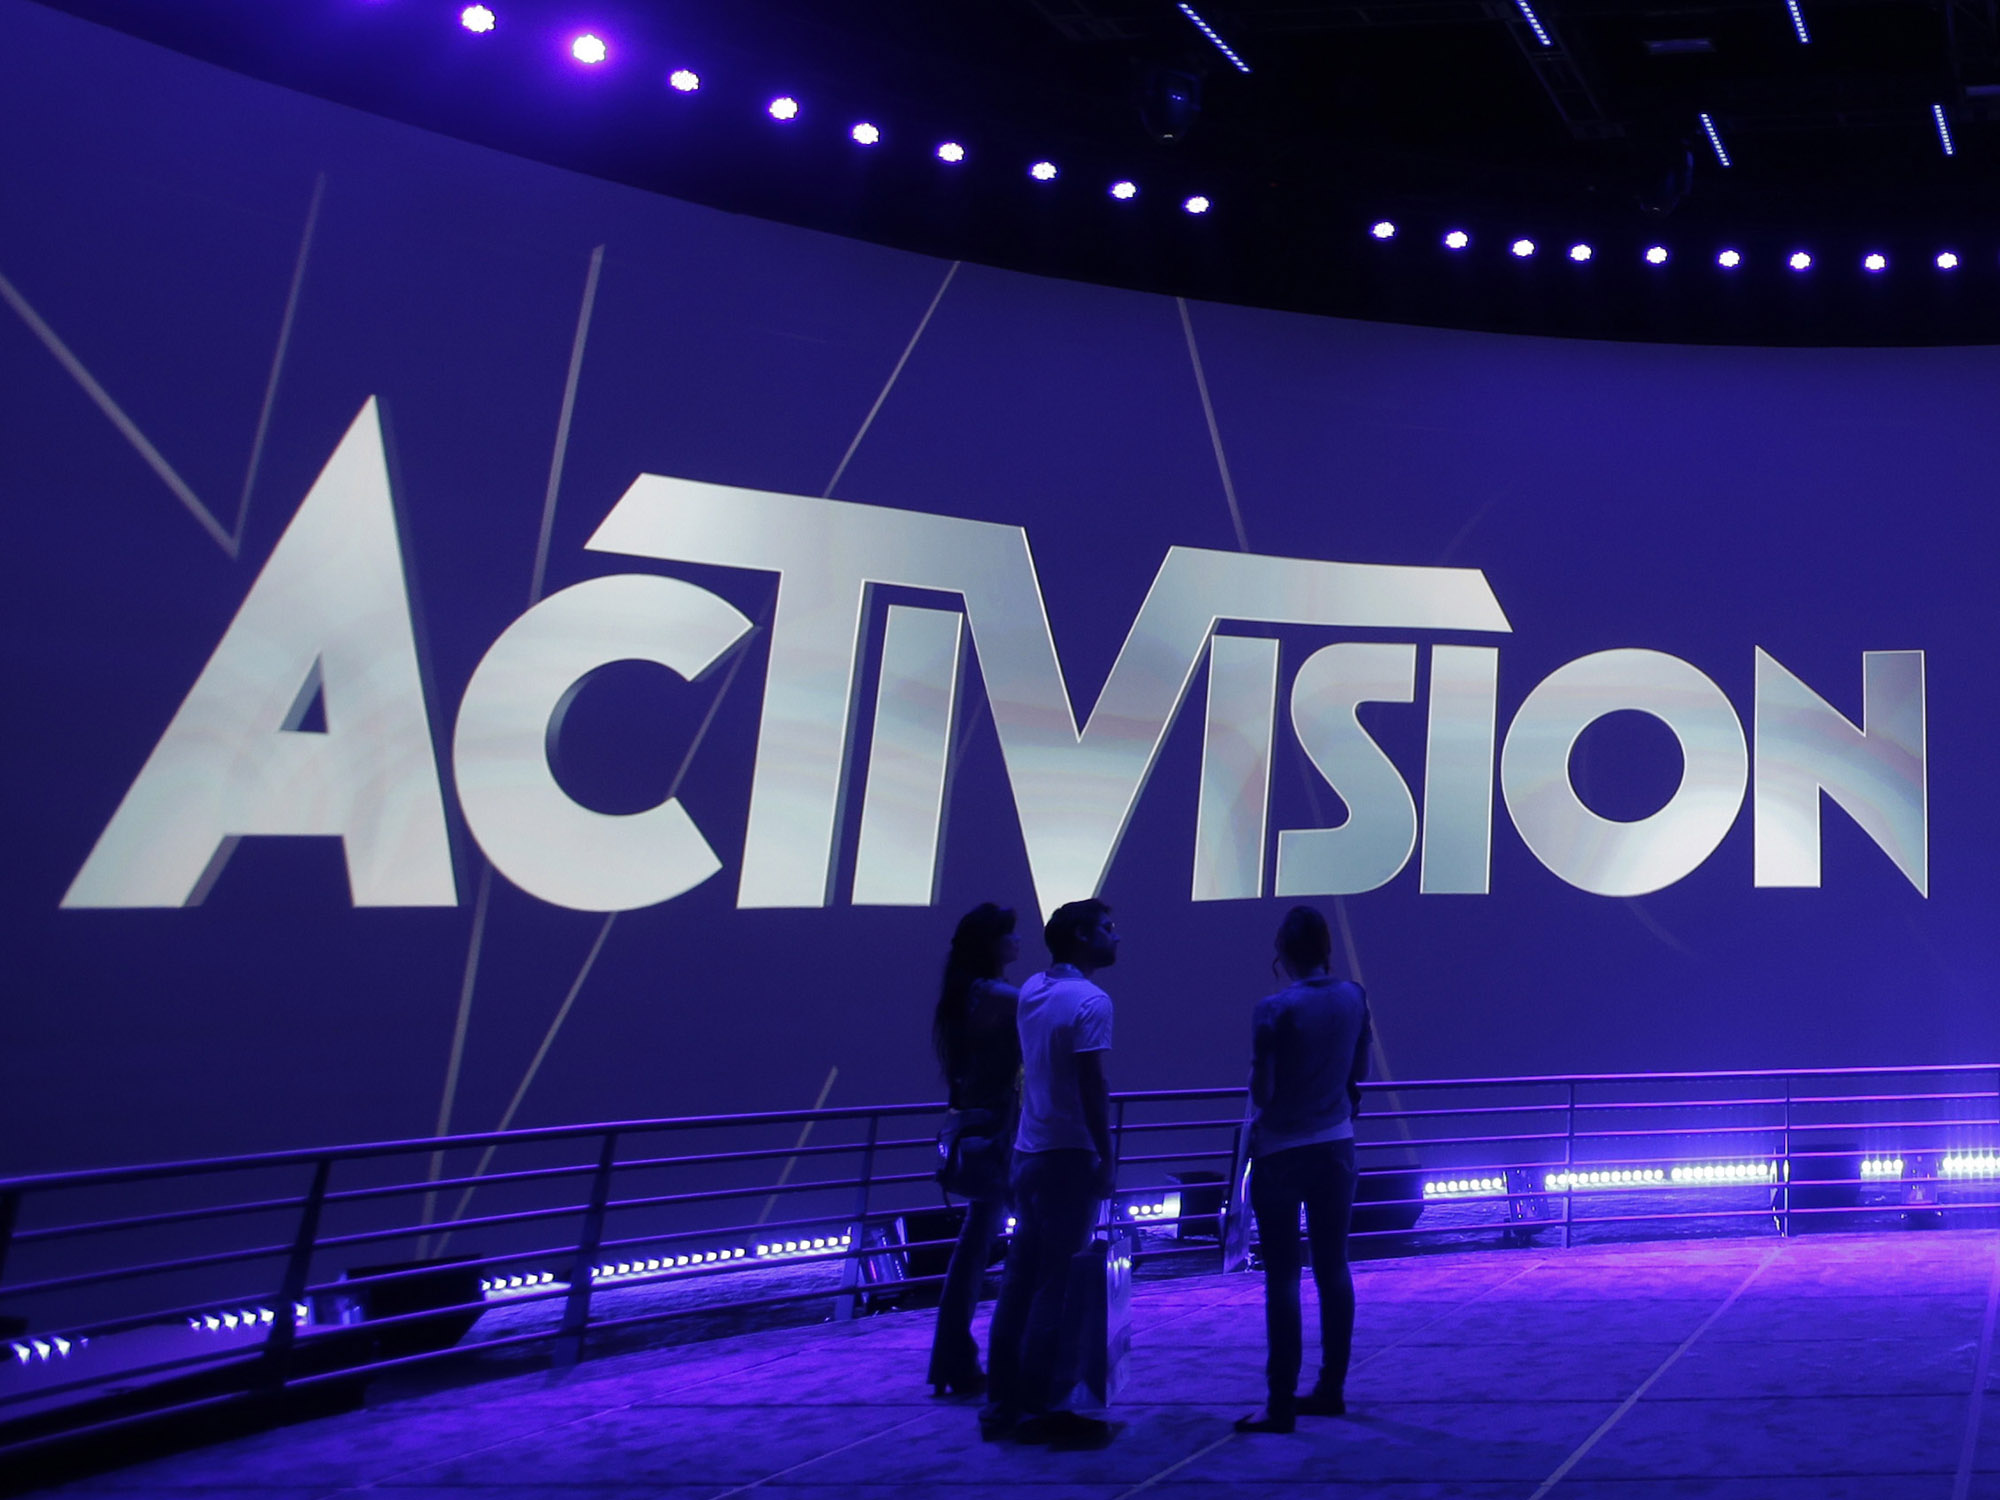 Topic · Activision ·